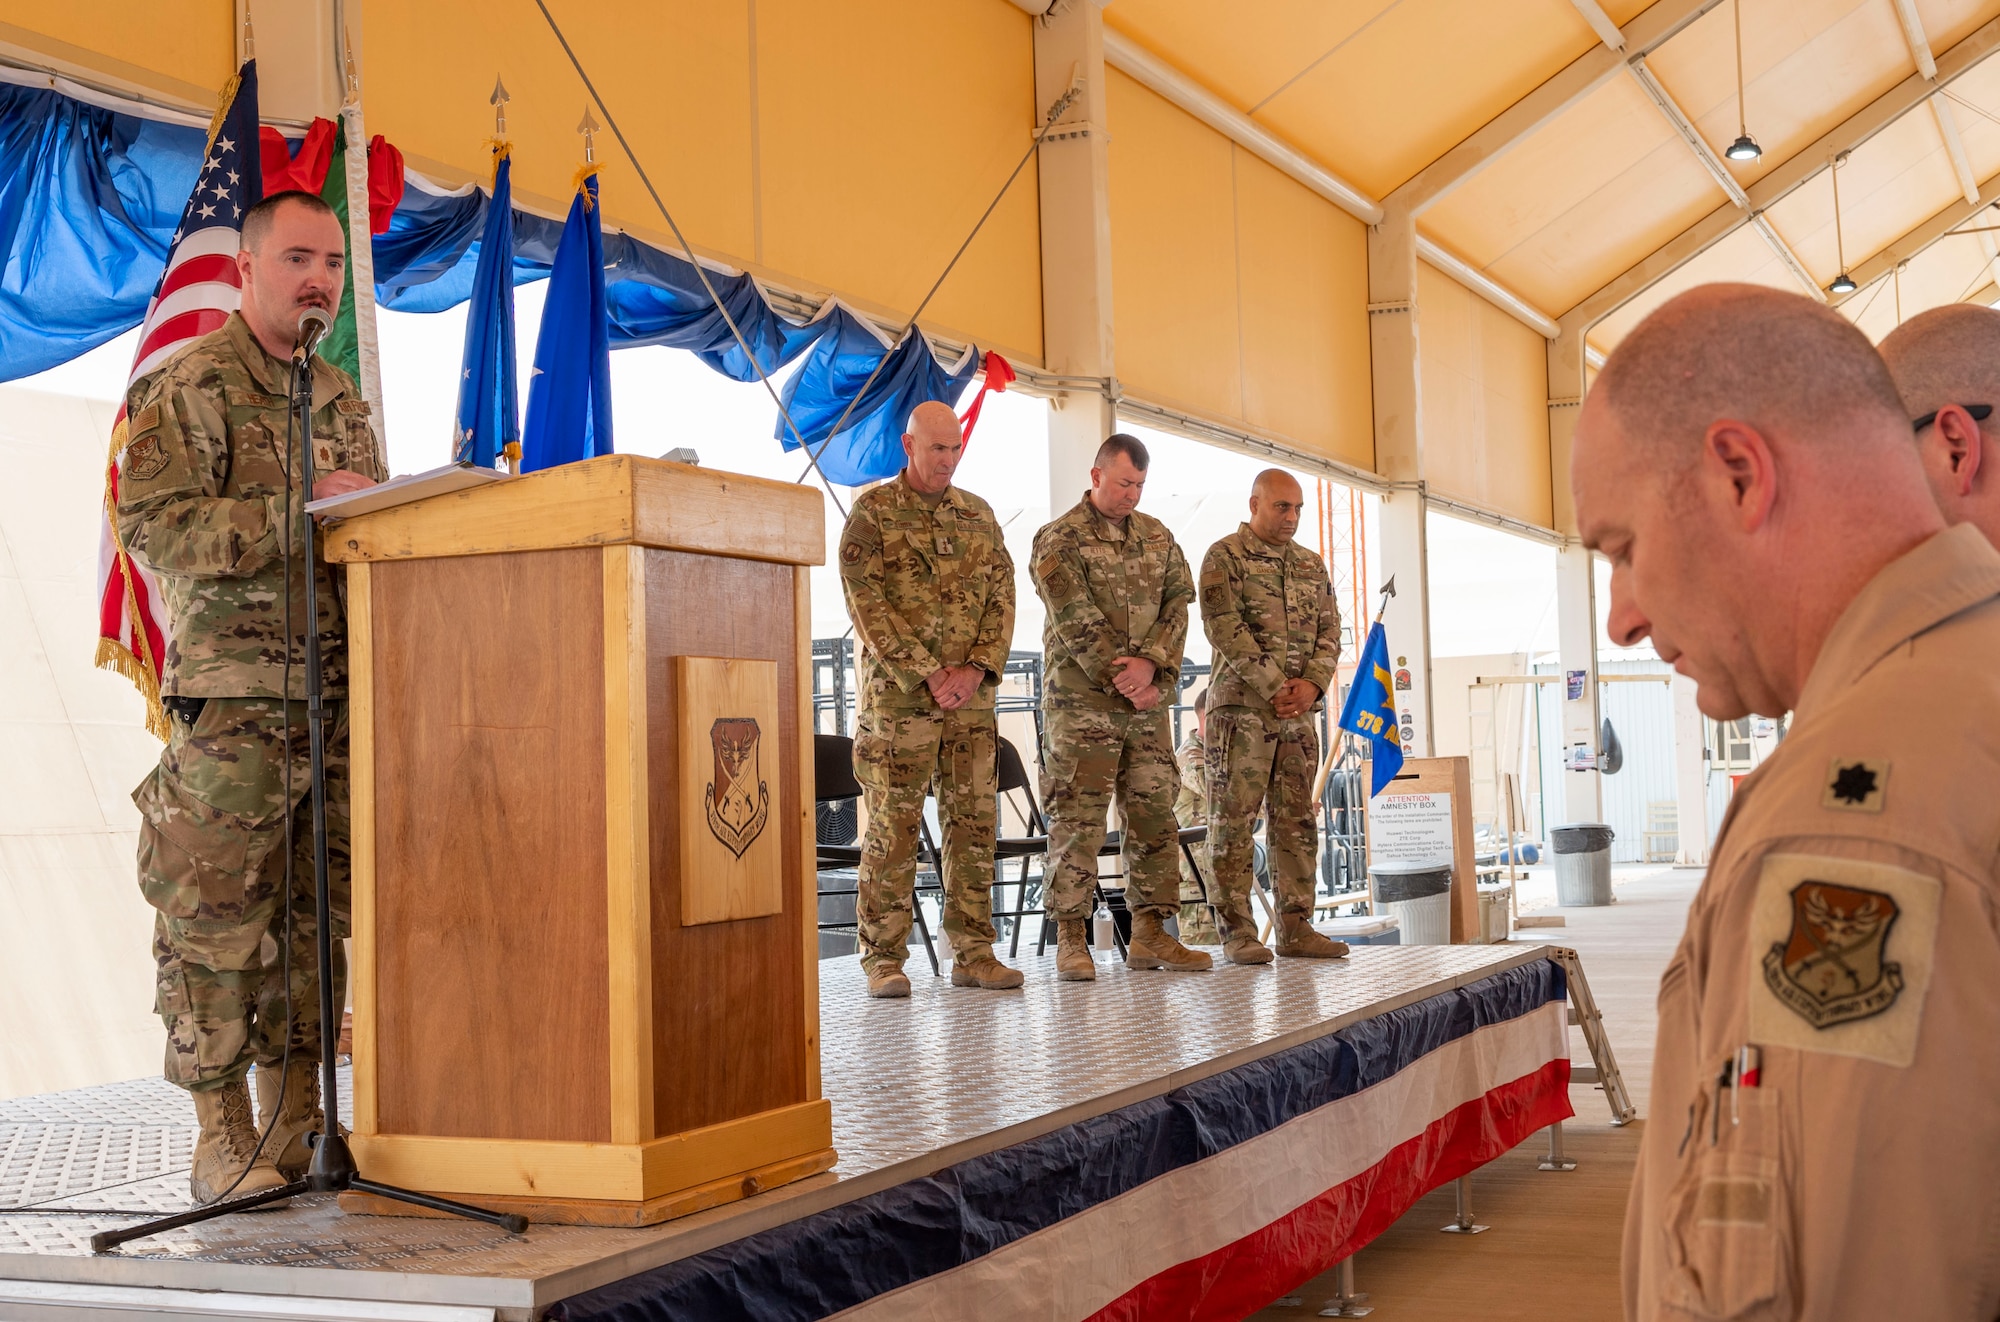 U.S. Air Force Chaplain (Maj.) Joel Heath, 378th Air Expeditionary Wing Chaplain, delivers an invocation during a change of command ceremony at Prince Sultan Air Base, Kingdom of Saudi Arabia, May 18, 2023. During the ceremony, Brig. Gen. William Betts relinquished command of the 378th AEW to Brig. Gen. Akshai Gandhi. The tradition of change of command ceremonies are to allow service members to witness their new leader assume the responsibility and trust associated with the position of commander. (U.S. Air Force photo by Senior Airman Stephani Barge)